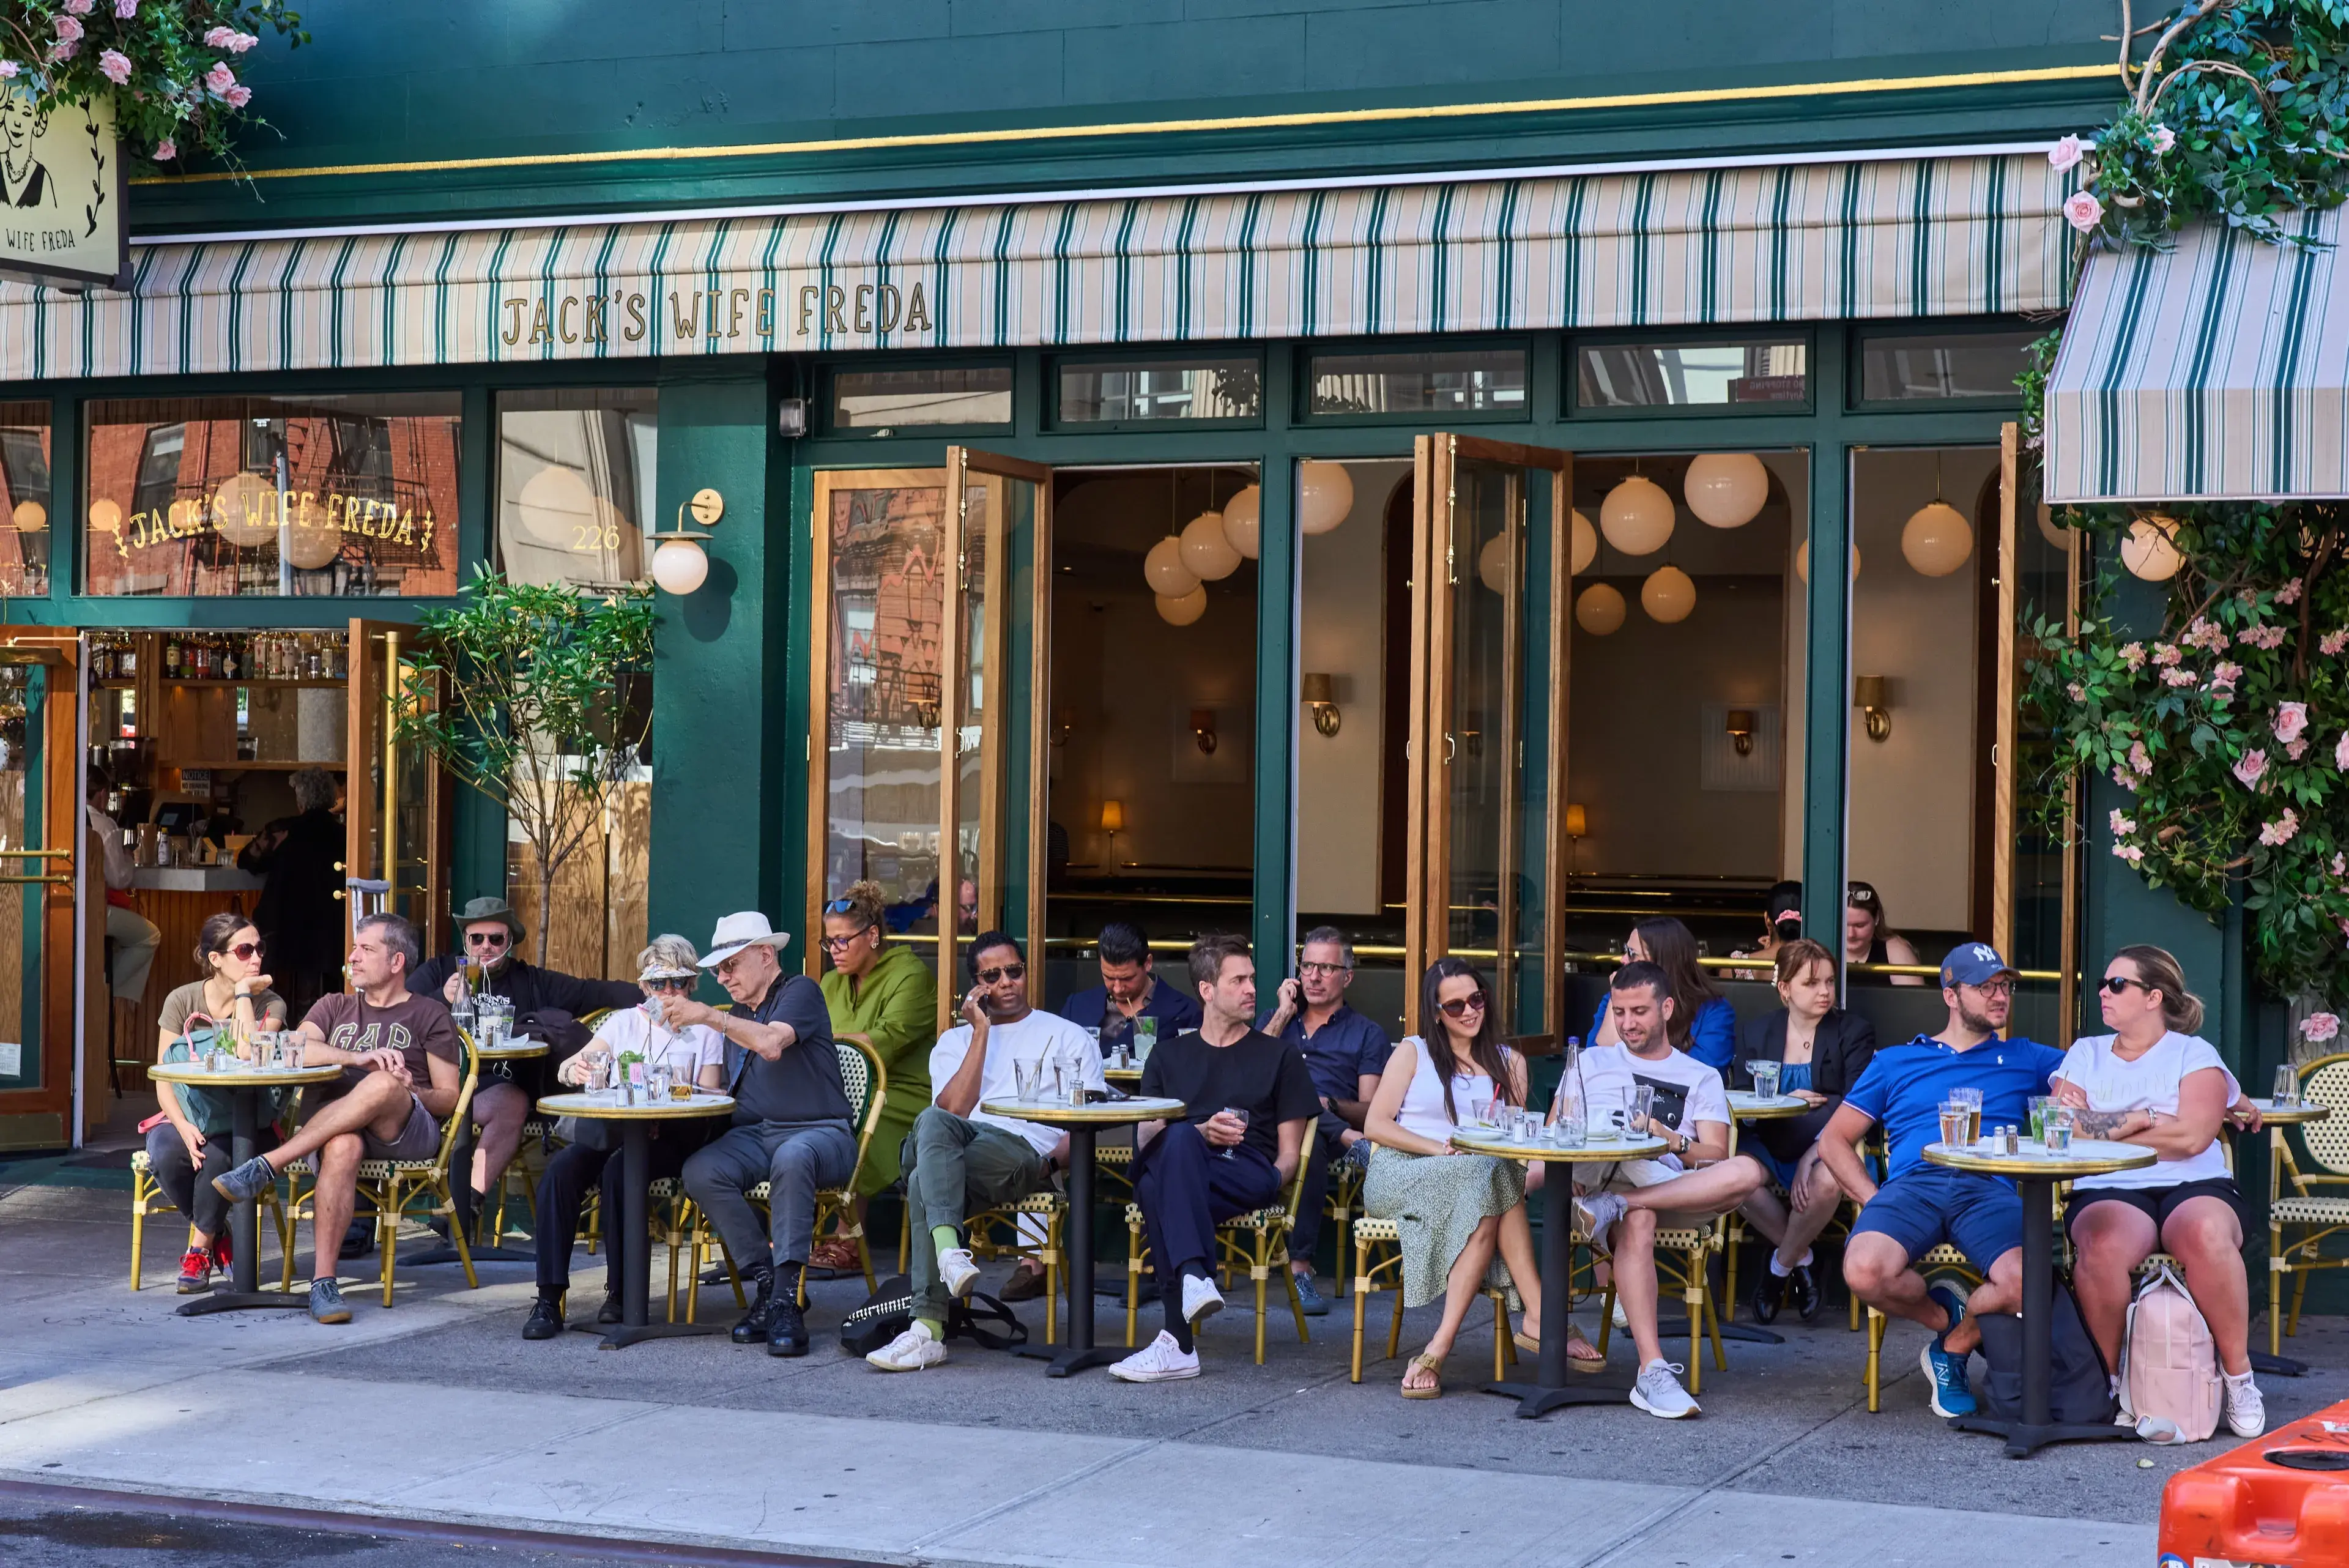 New York, NY - June 29, 2022: Diners sitting at a sidewalk cafe on Lafayette St in Nolita NYC. It is called Jack's Wife Freda Restaurant. 